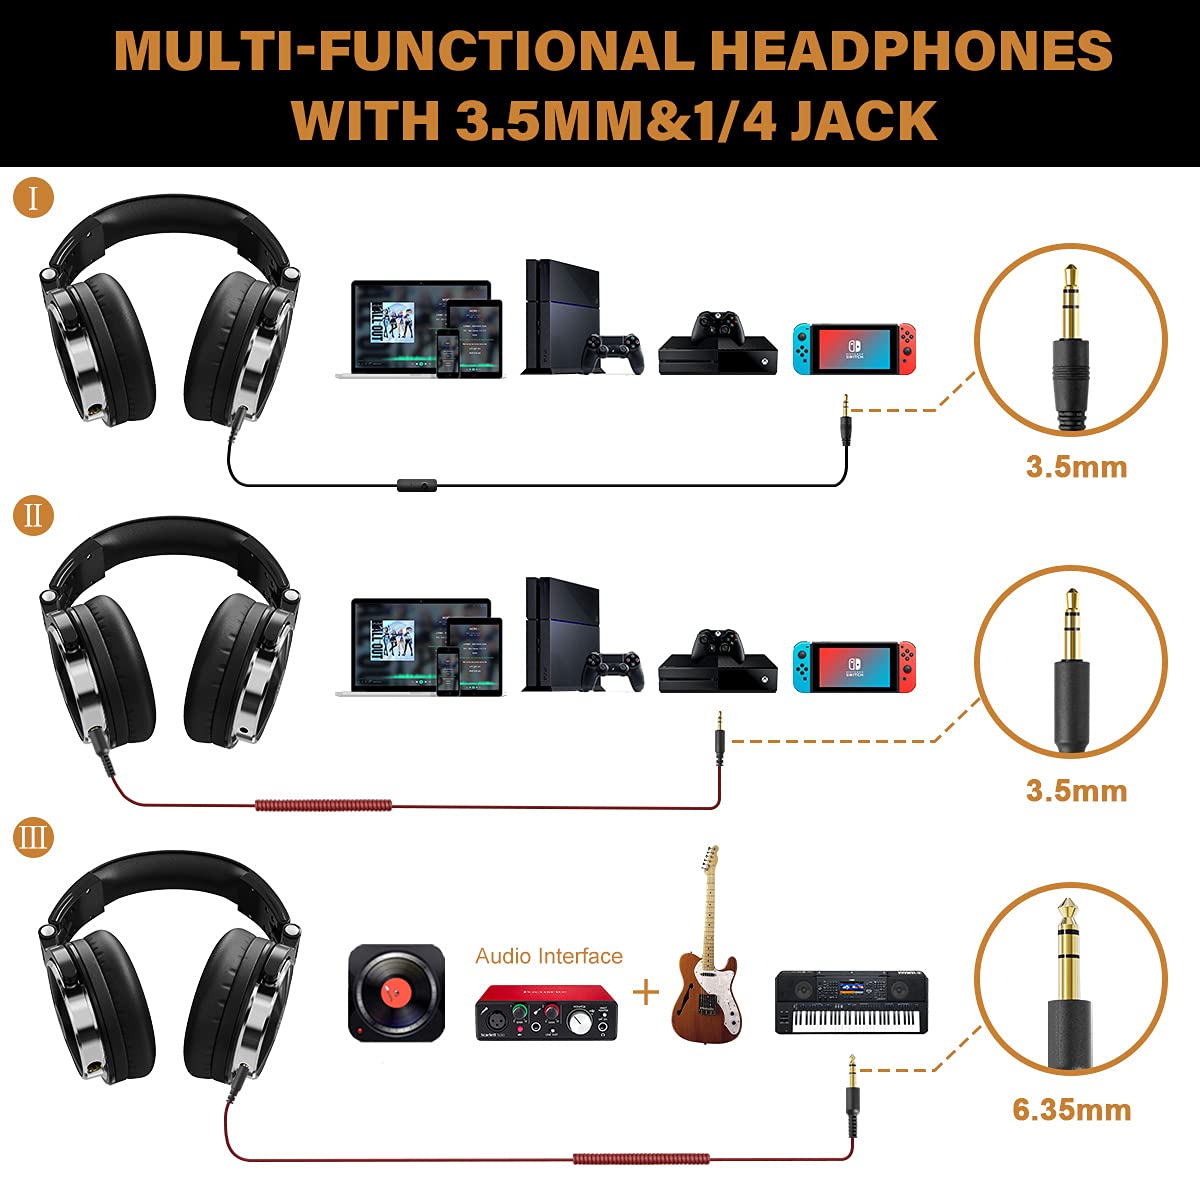 OneOdio Wired DJ Stereo Headsets Over Ear Headphones Studio Monitor & Mixing  with 50mm Neodymium Drivers and 1/4 to 3.5mm Jack for AMP Computer Recording Podcast Keyboard Guitar Laptop - Black - Opticdeals